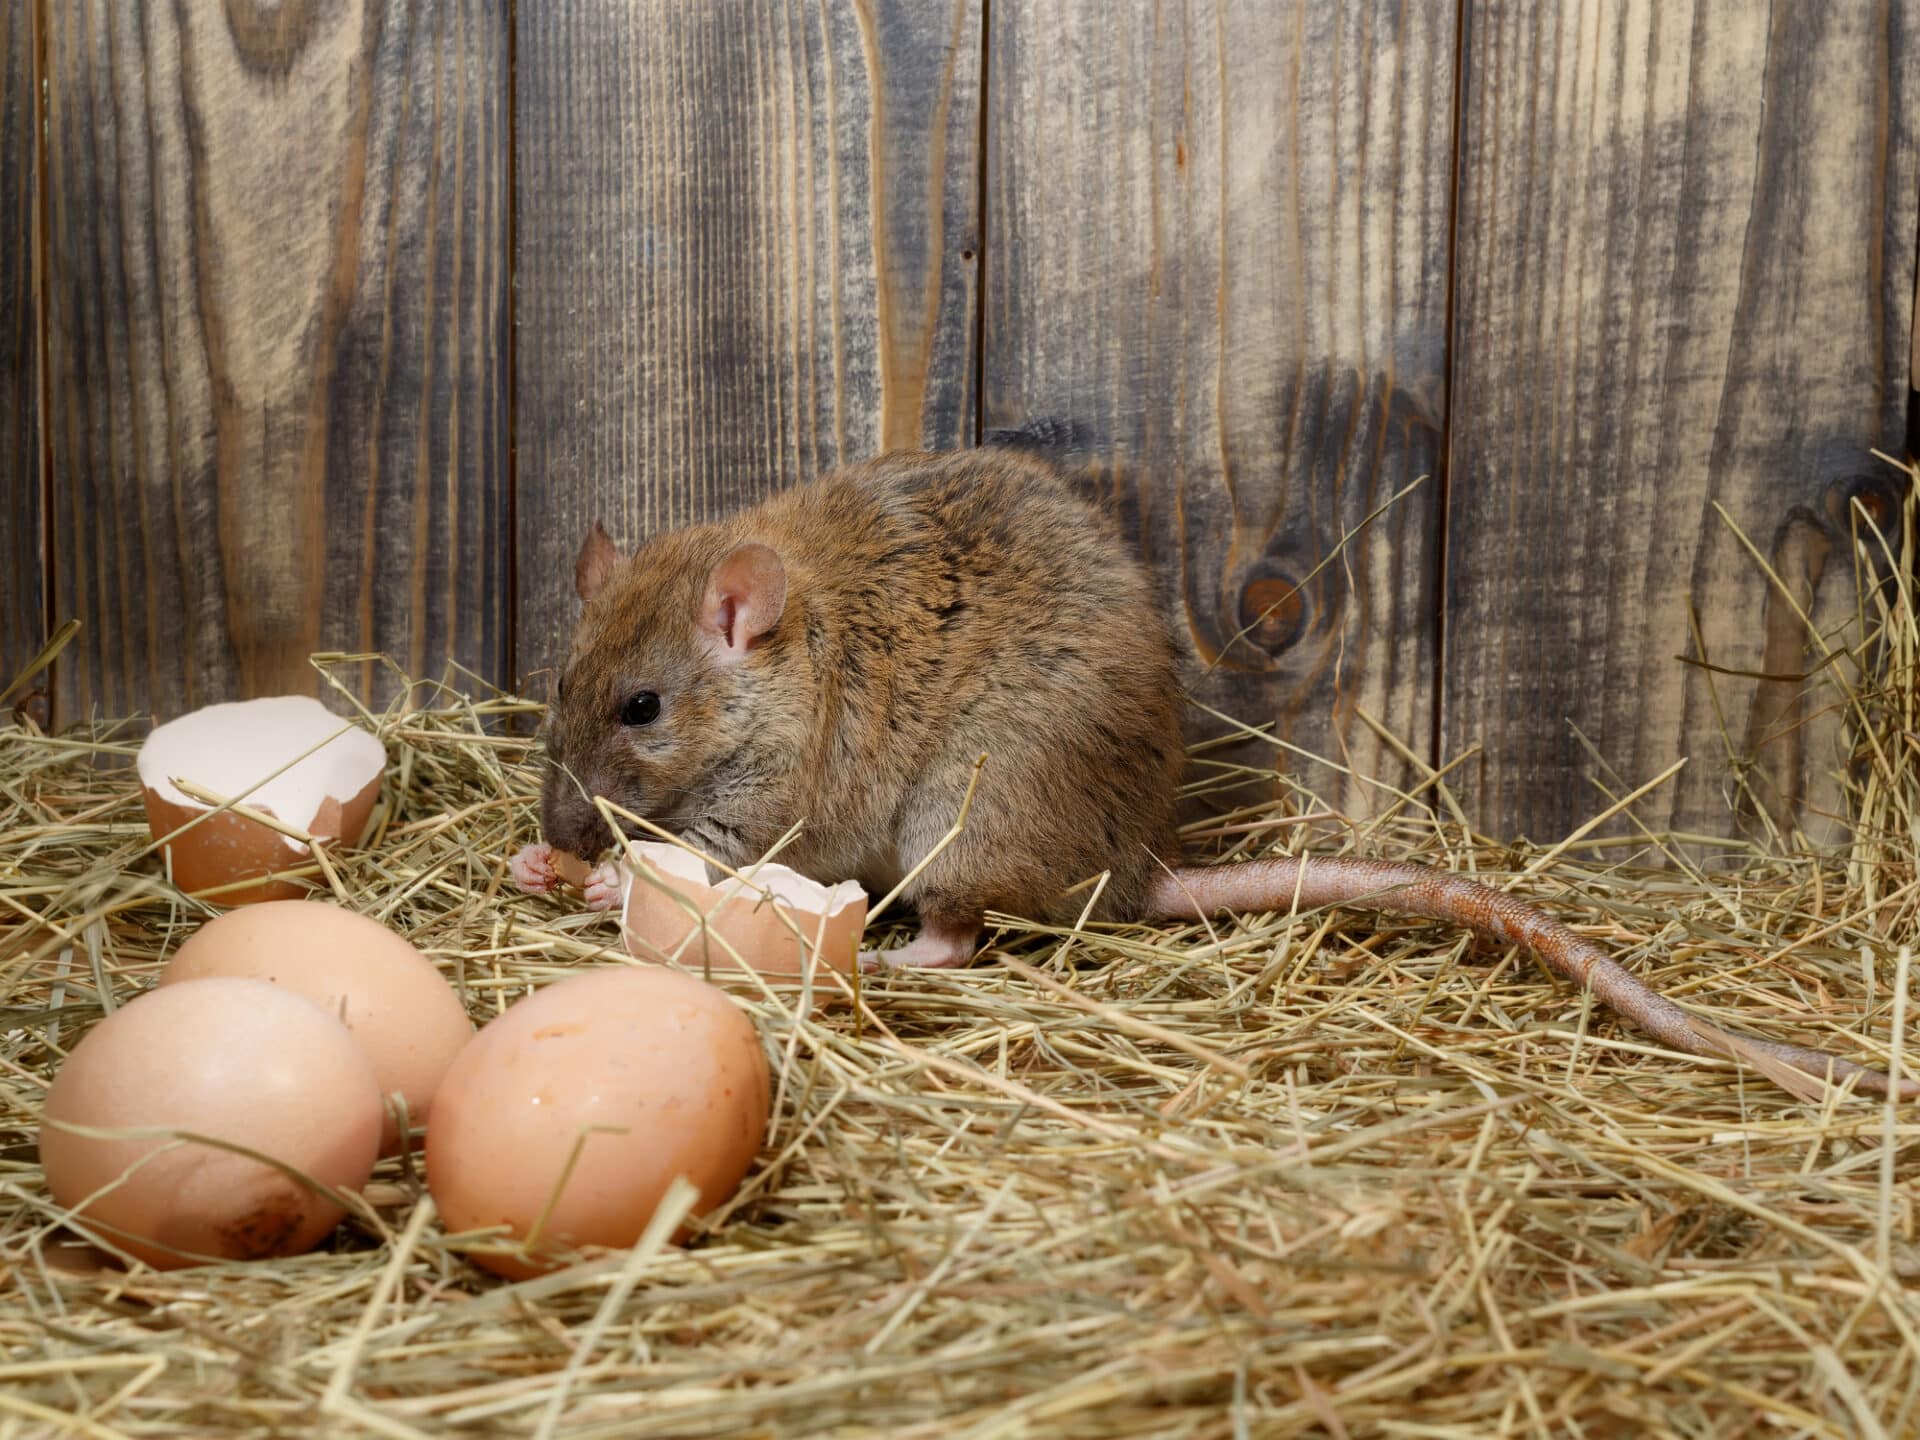 How to Keep Rats from Infesting Your Urban Chicken Coop